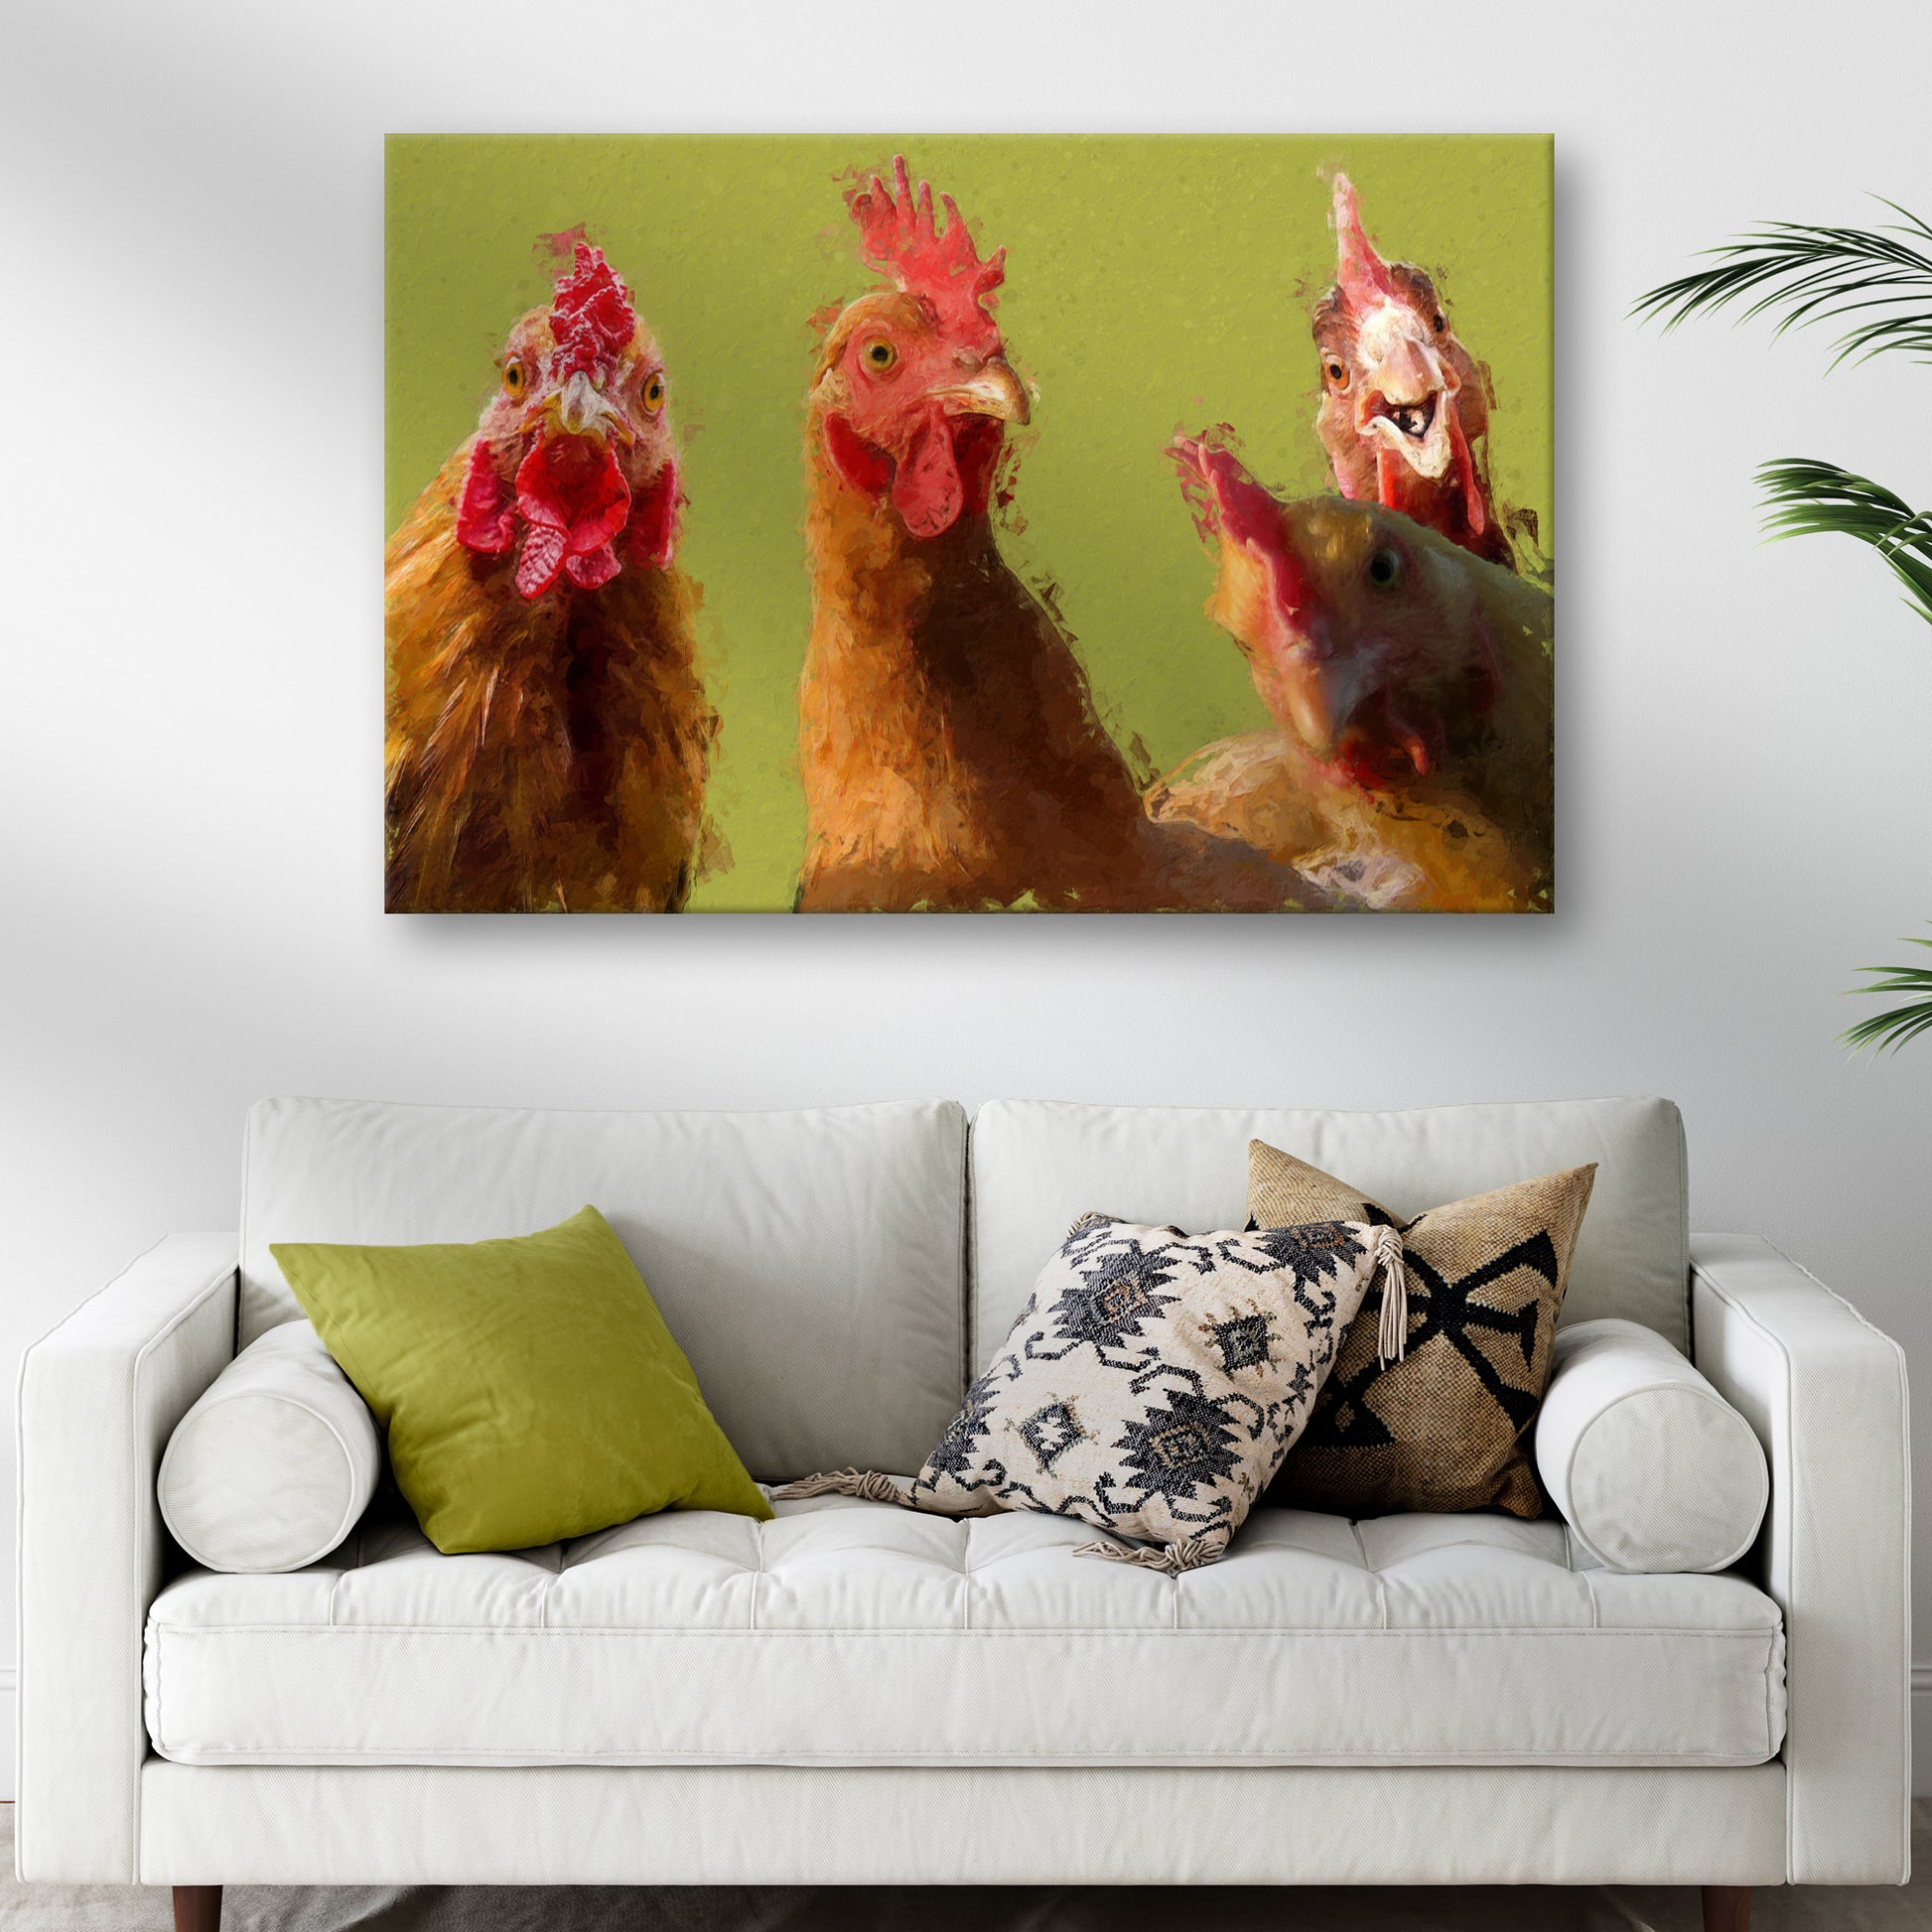 Curious Chicken Rooster Canvas Wall Art Style 2 - Image by Tailored Canvases